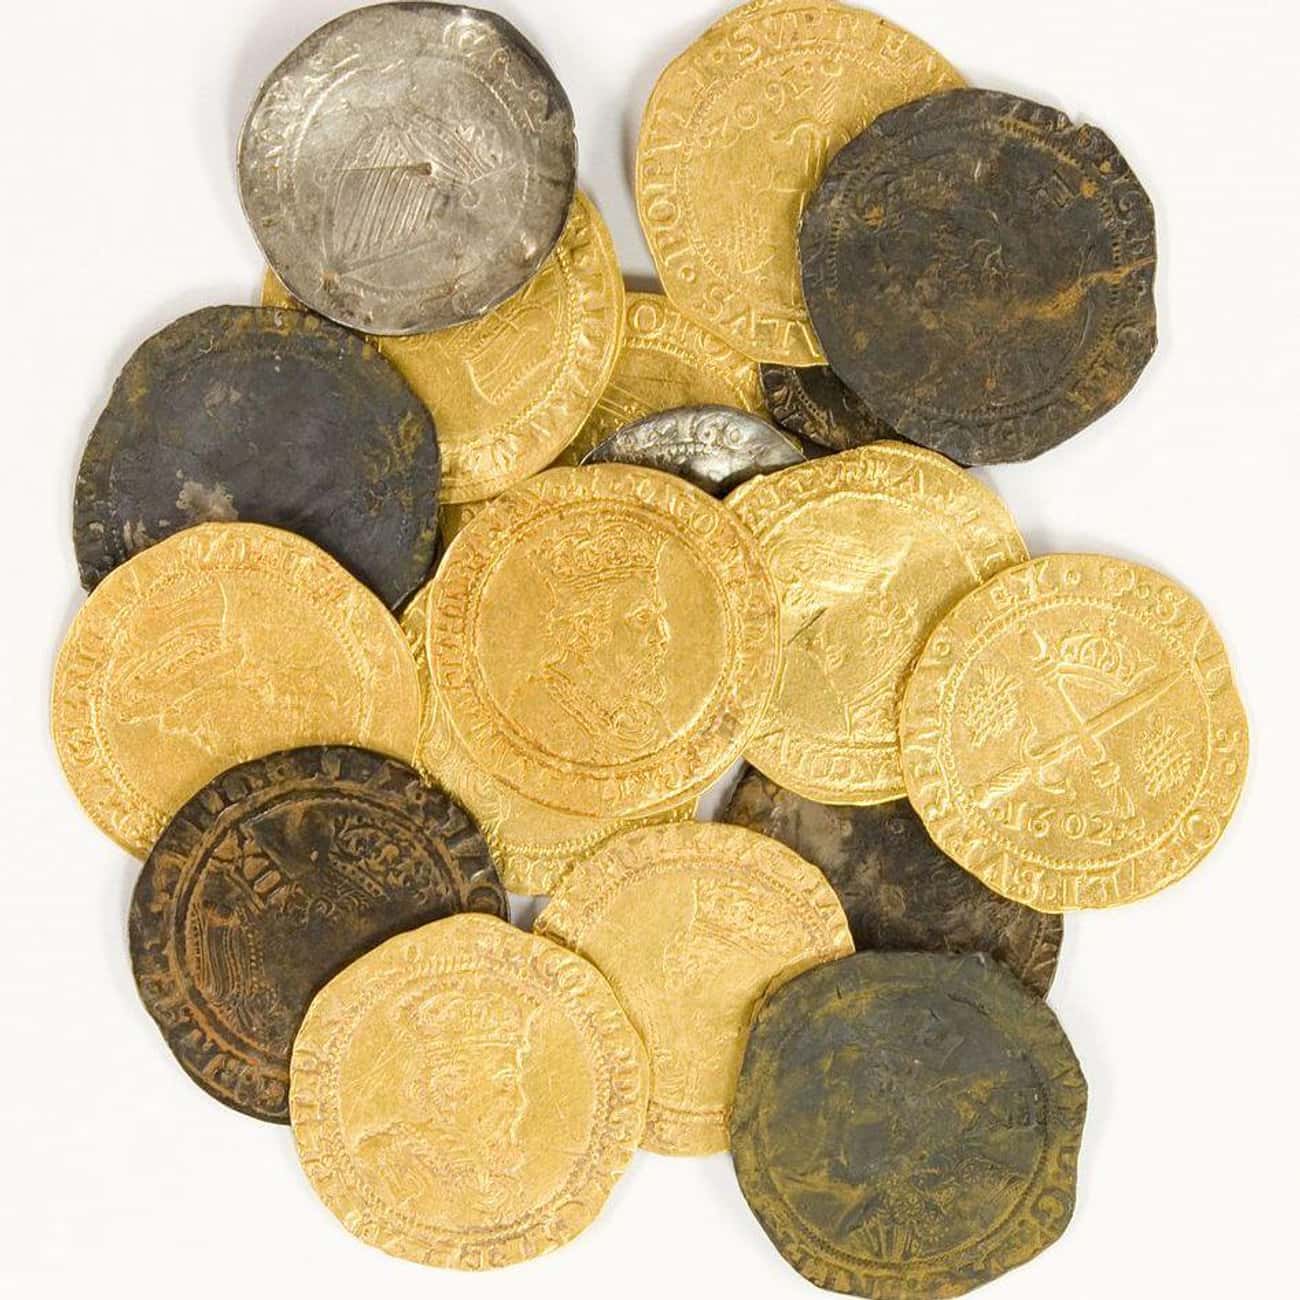 Early 1600s: The British Pound